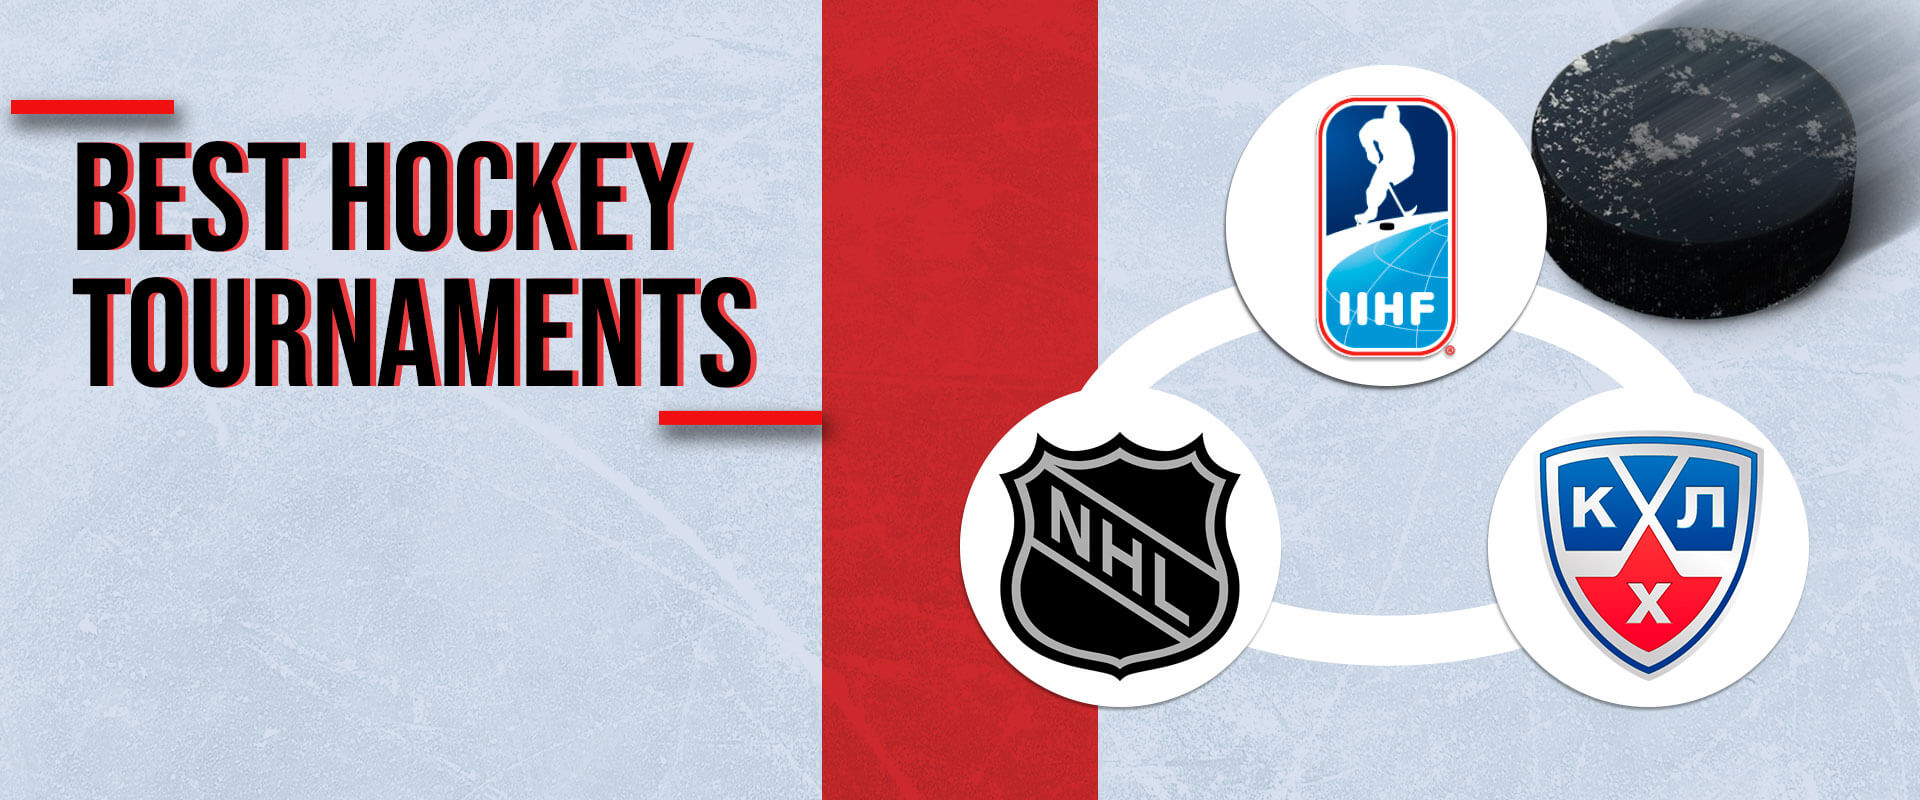 The most prominent hockey tournaments.